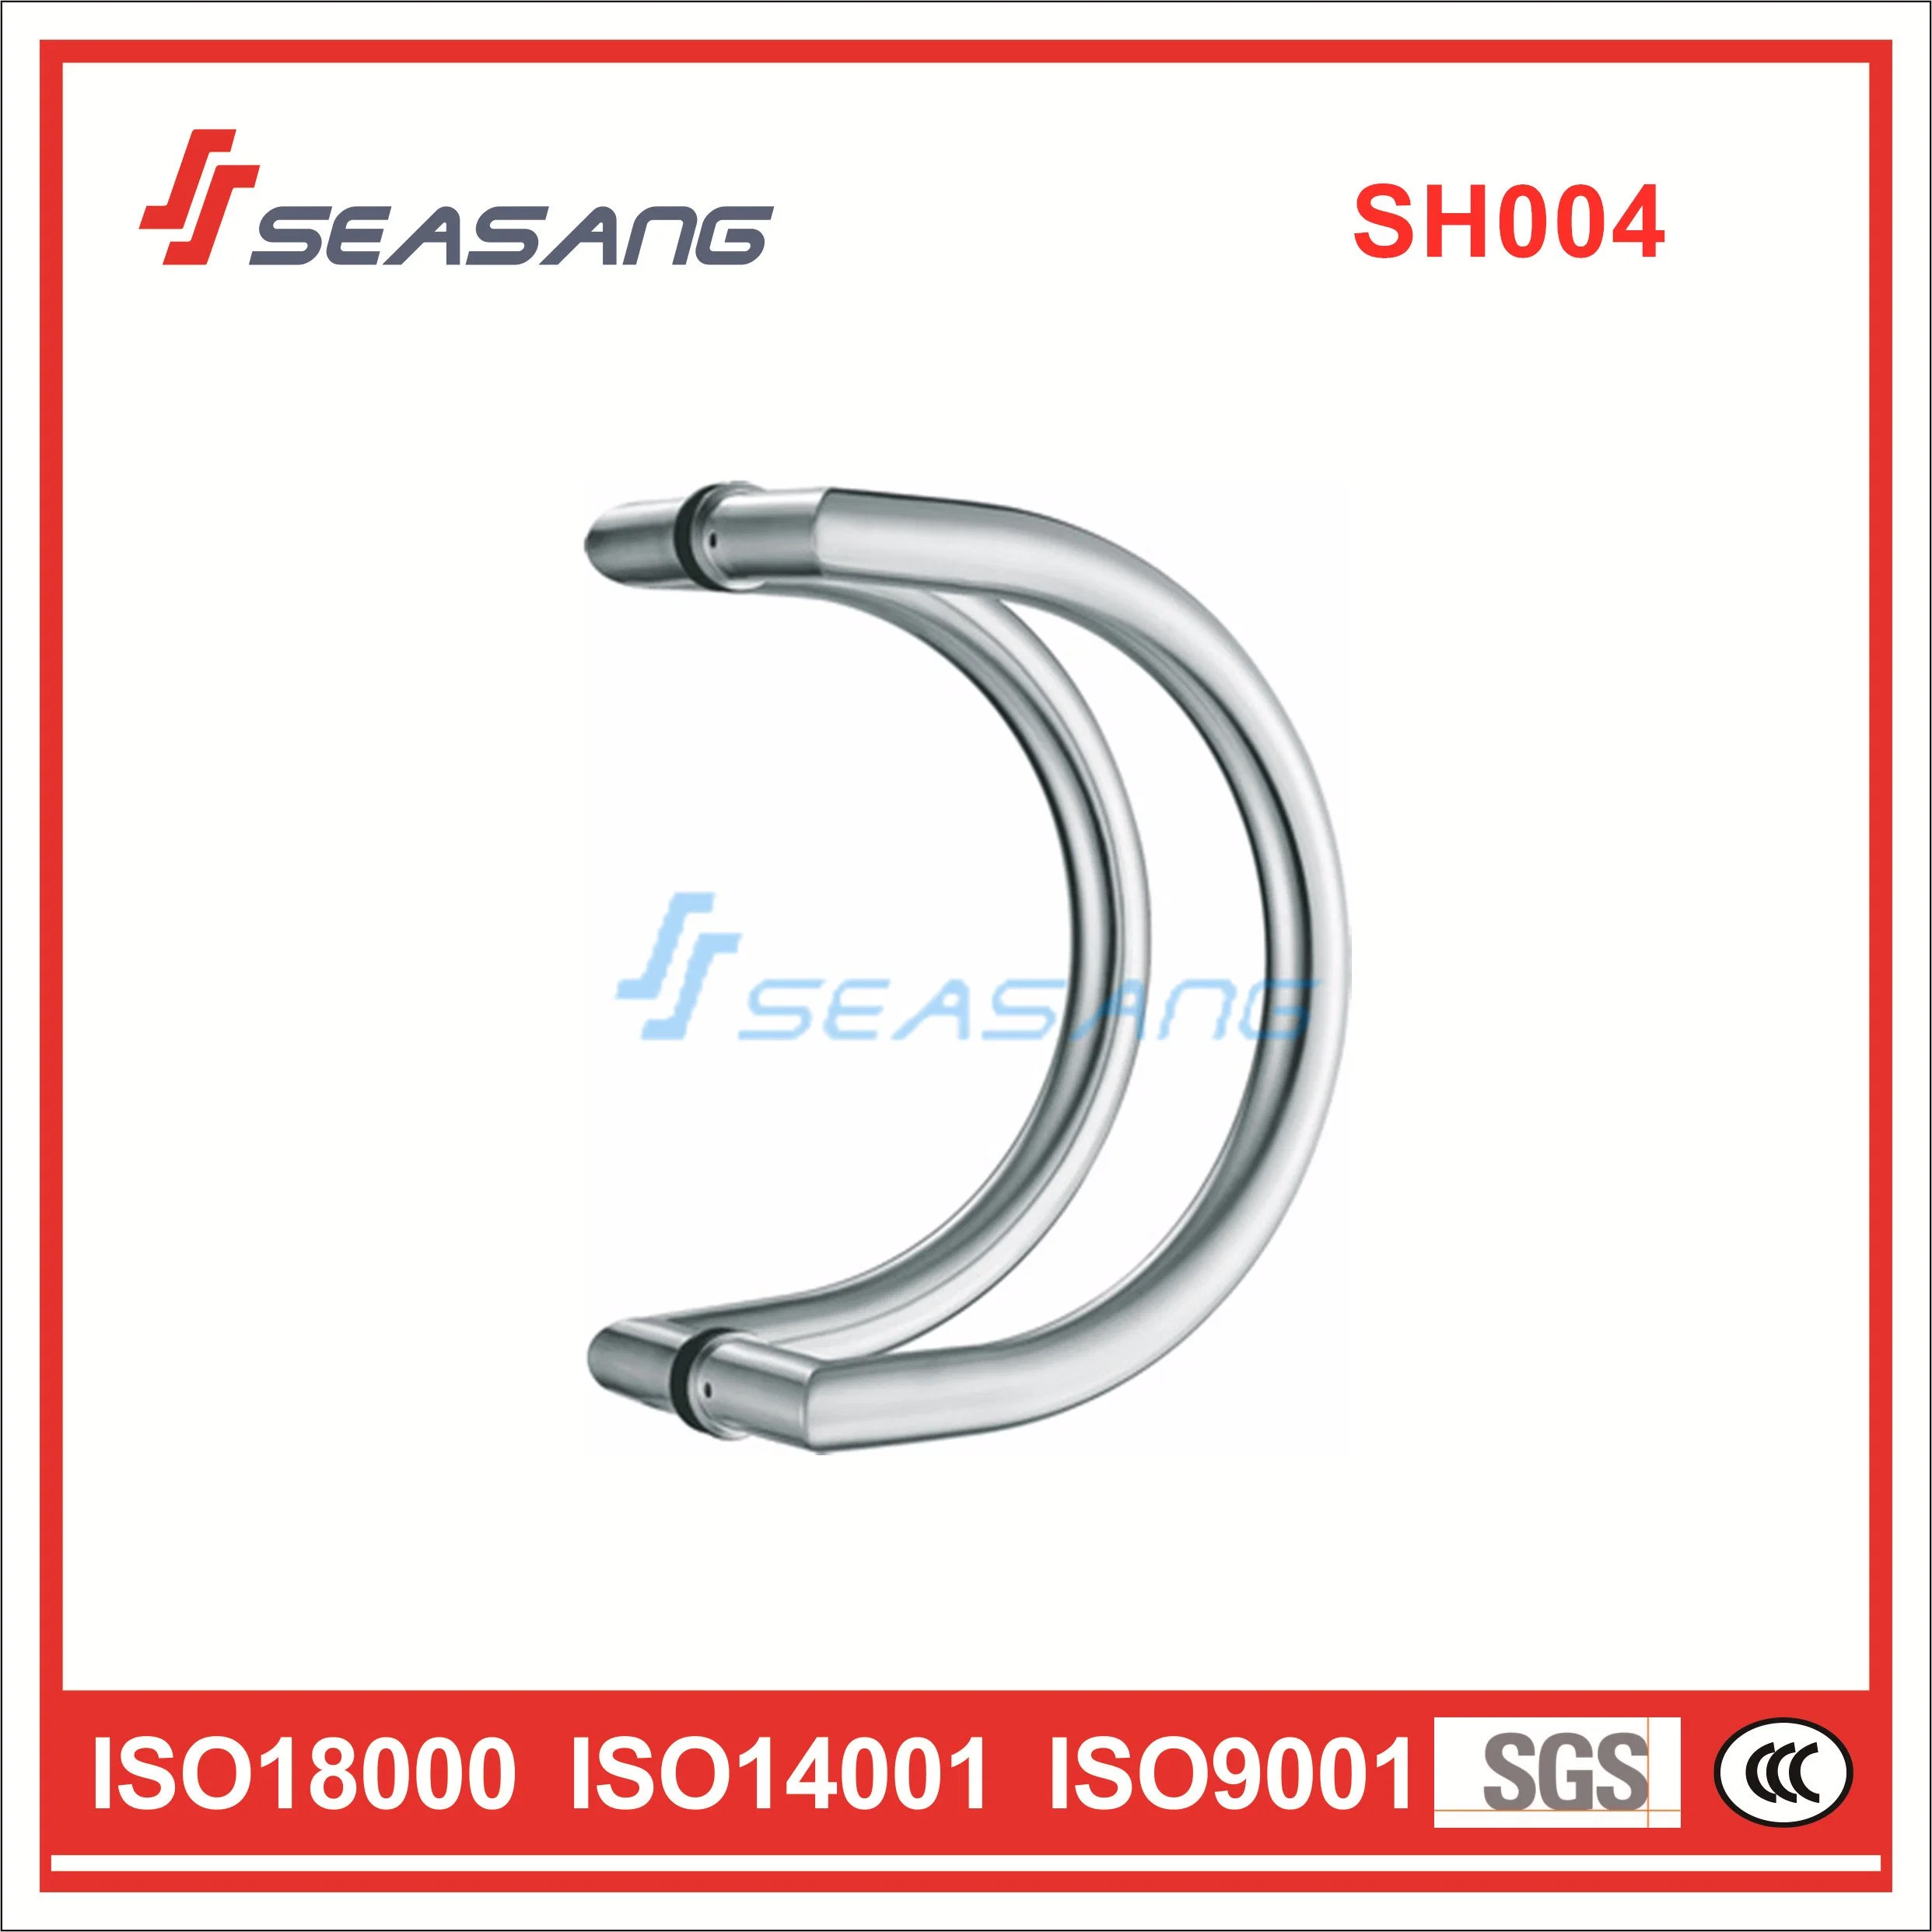 High Quality Stainless Steel Door Pull Handle Made in China